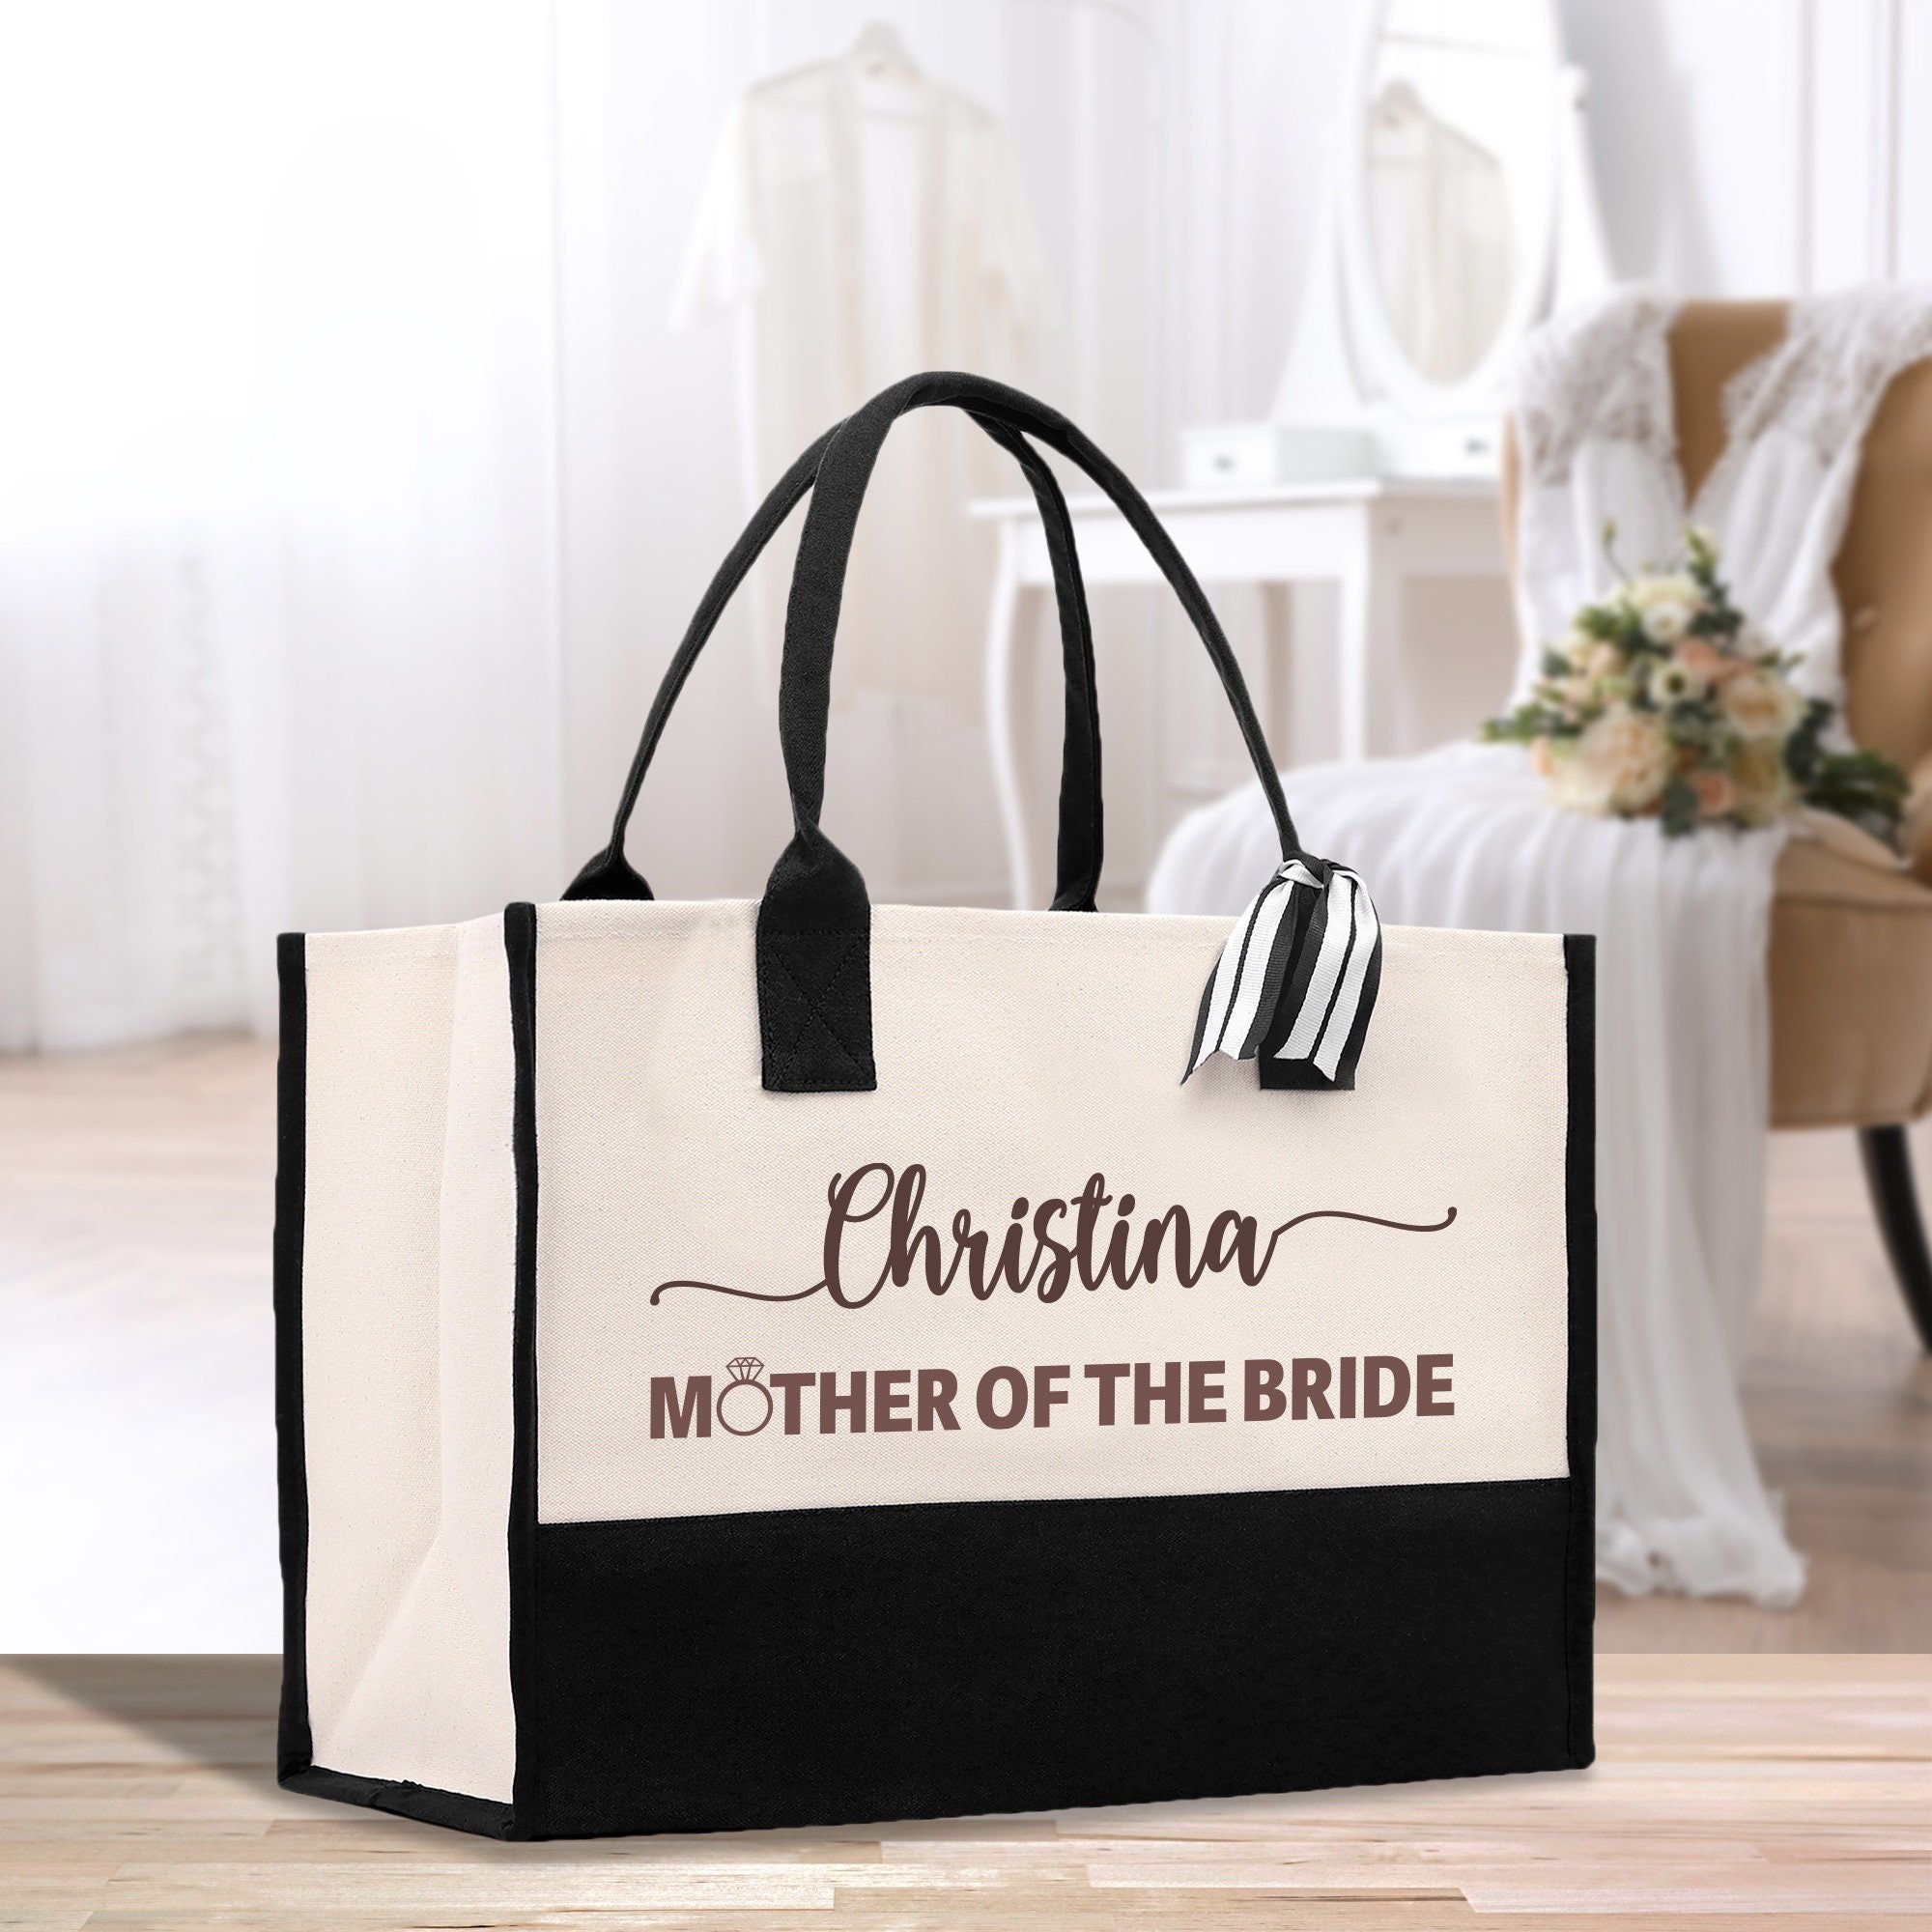 a mother of the bride bag sitting on the floor